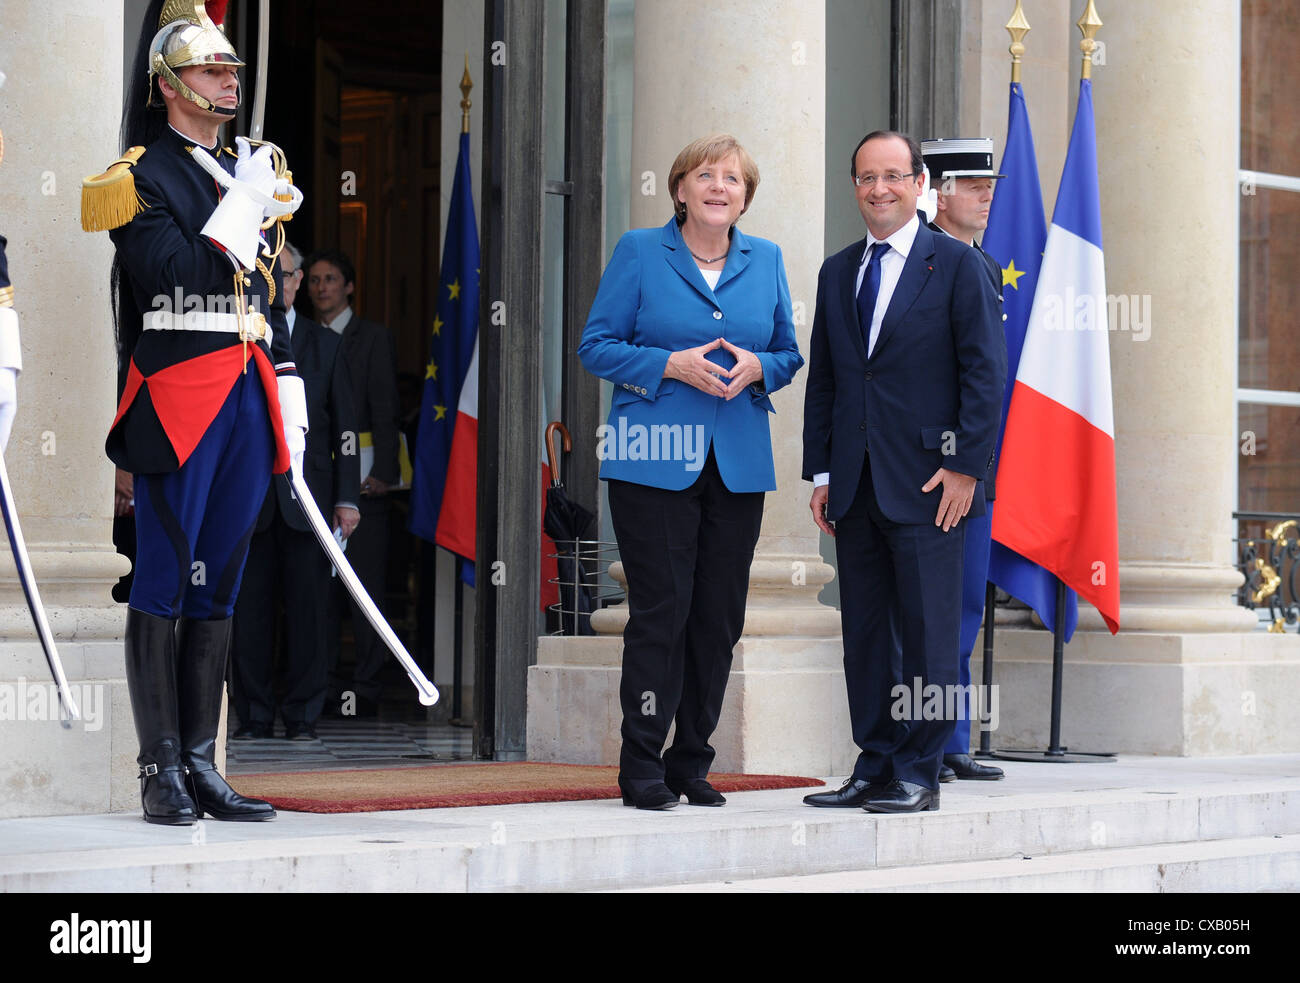 Meeting between French president Francois Hollande and german chancellor Angela Merkel at the Elysee palace in Paris, France. Stock Photo